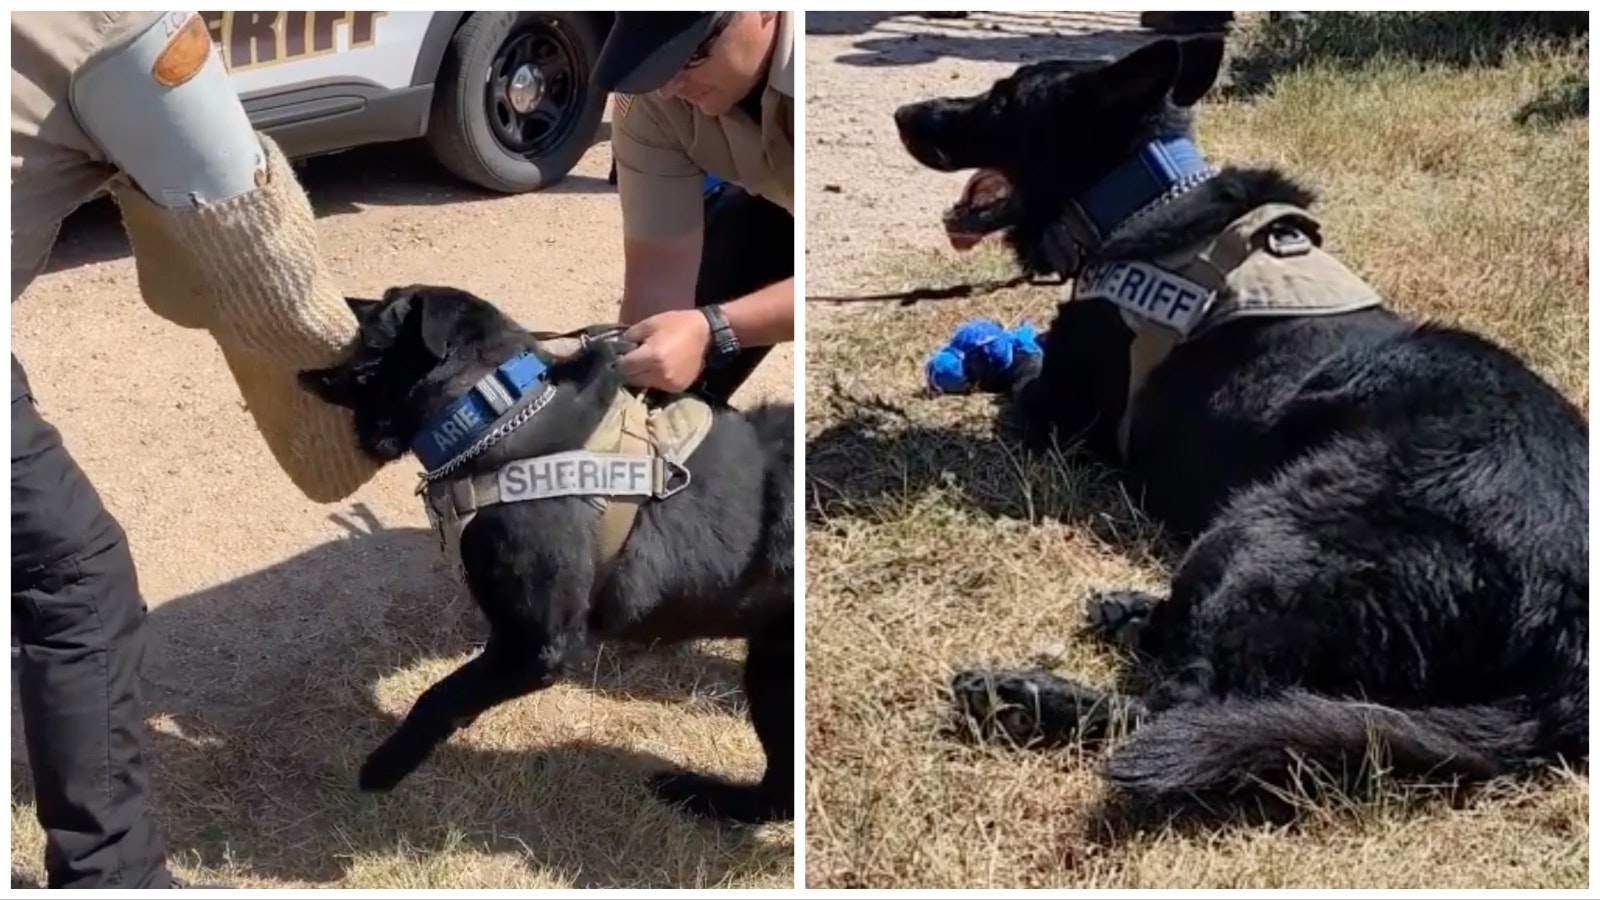 During a retirement ceremony Wednesday, Arie got one last bite at the training pad, and lots of pats and love from his Laramie County Sheriff's Office team.